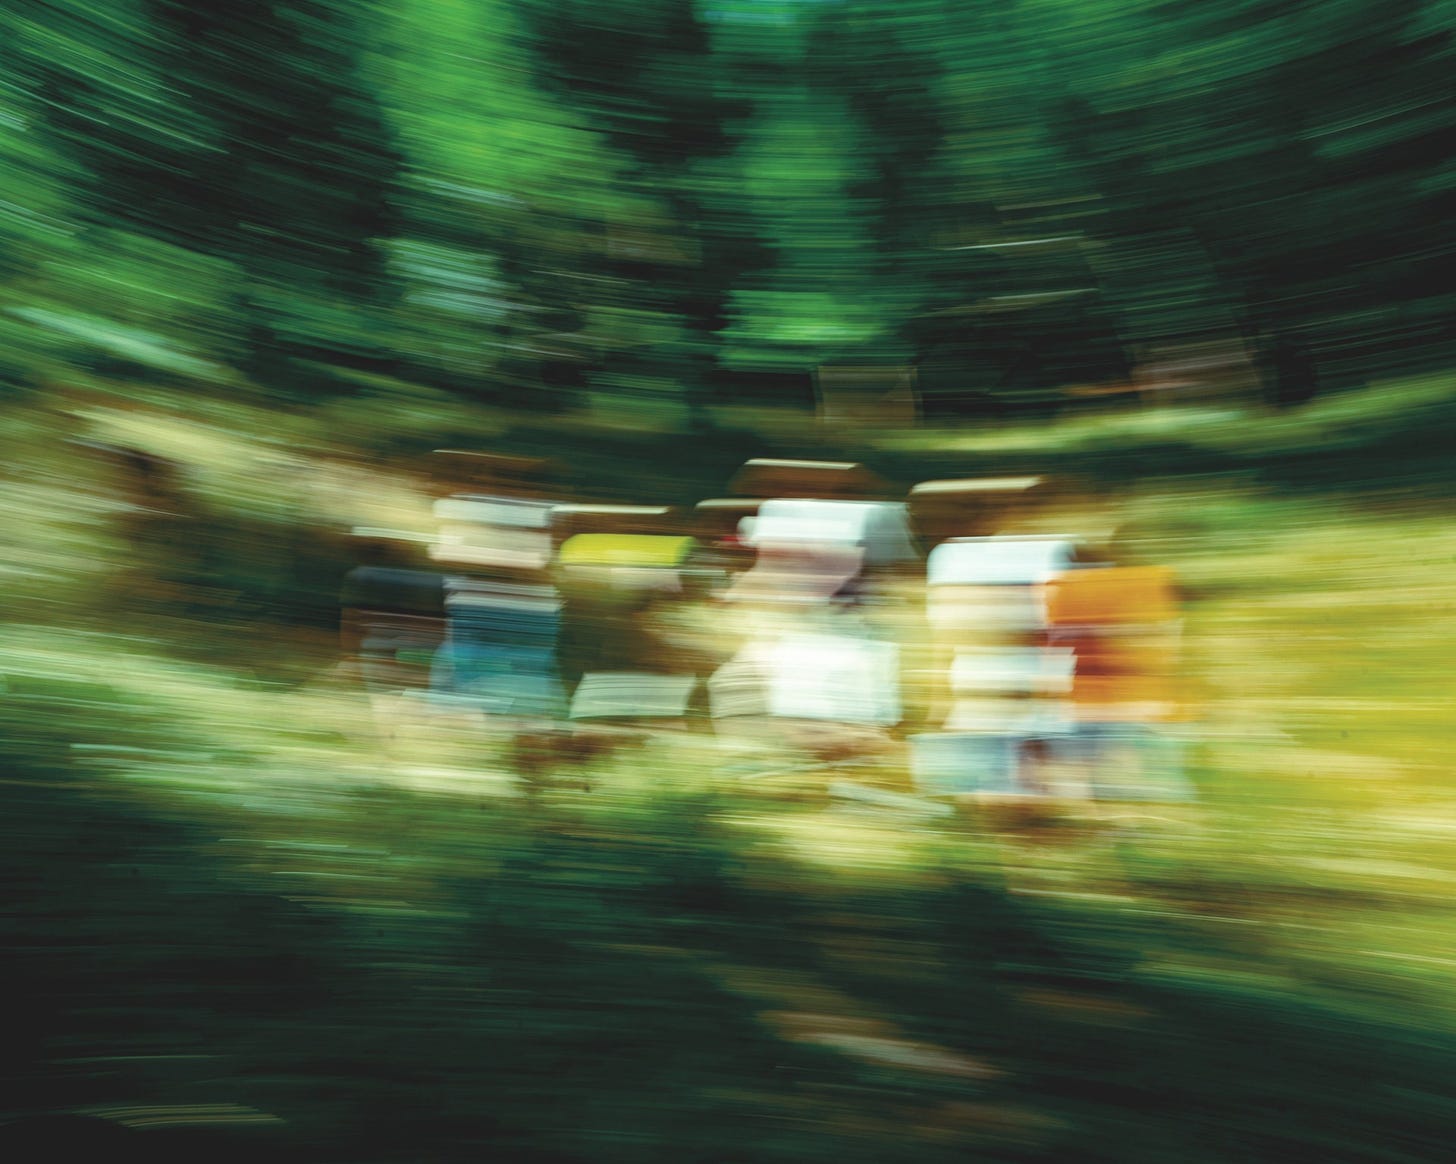 A blurry shot of people walking in nature in Europe.